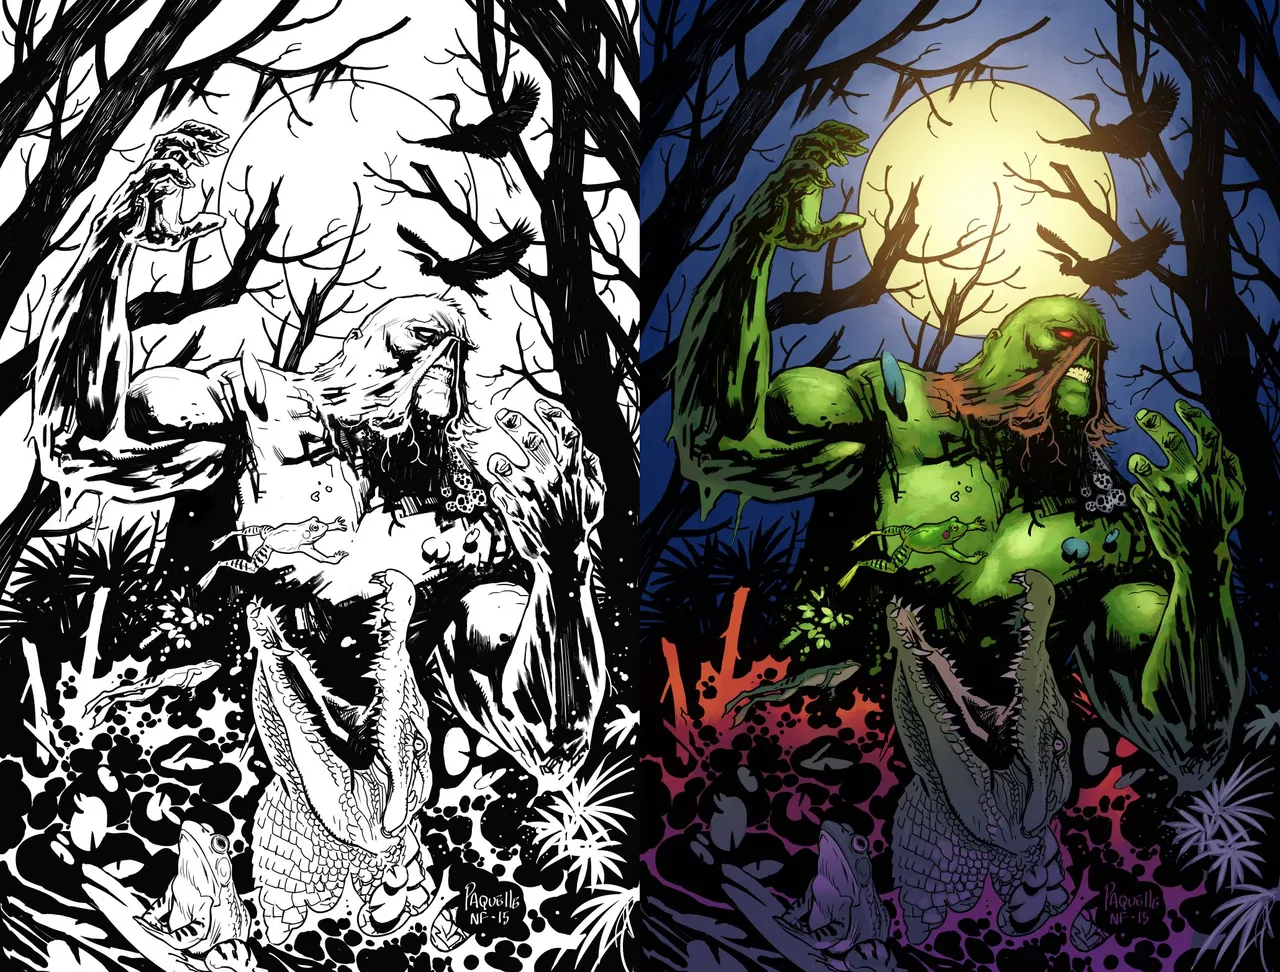 Swamp thing side by side comparison